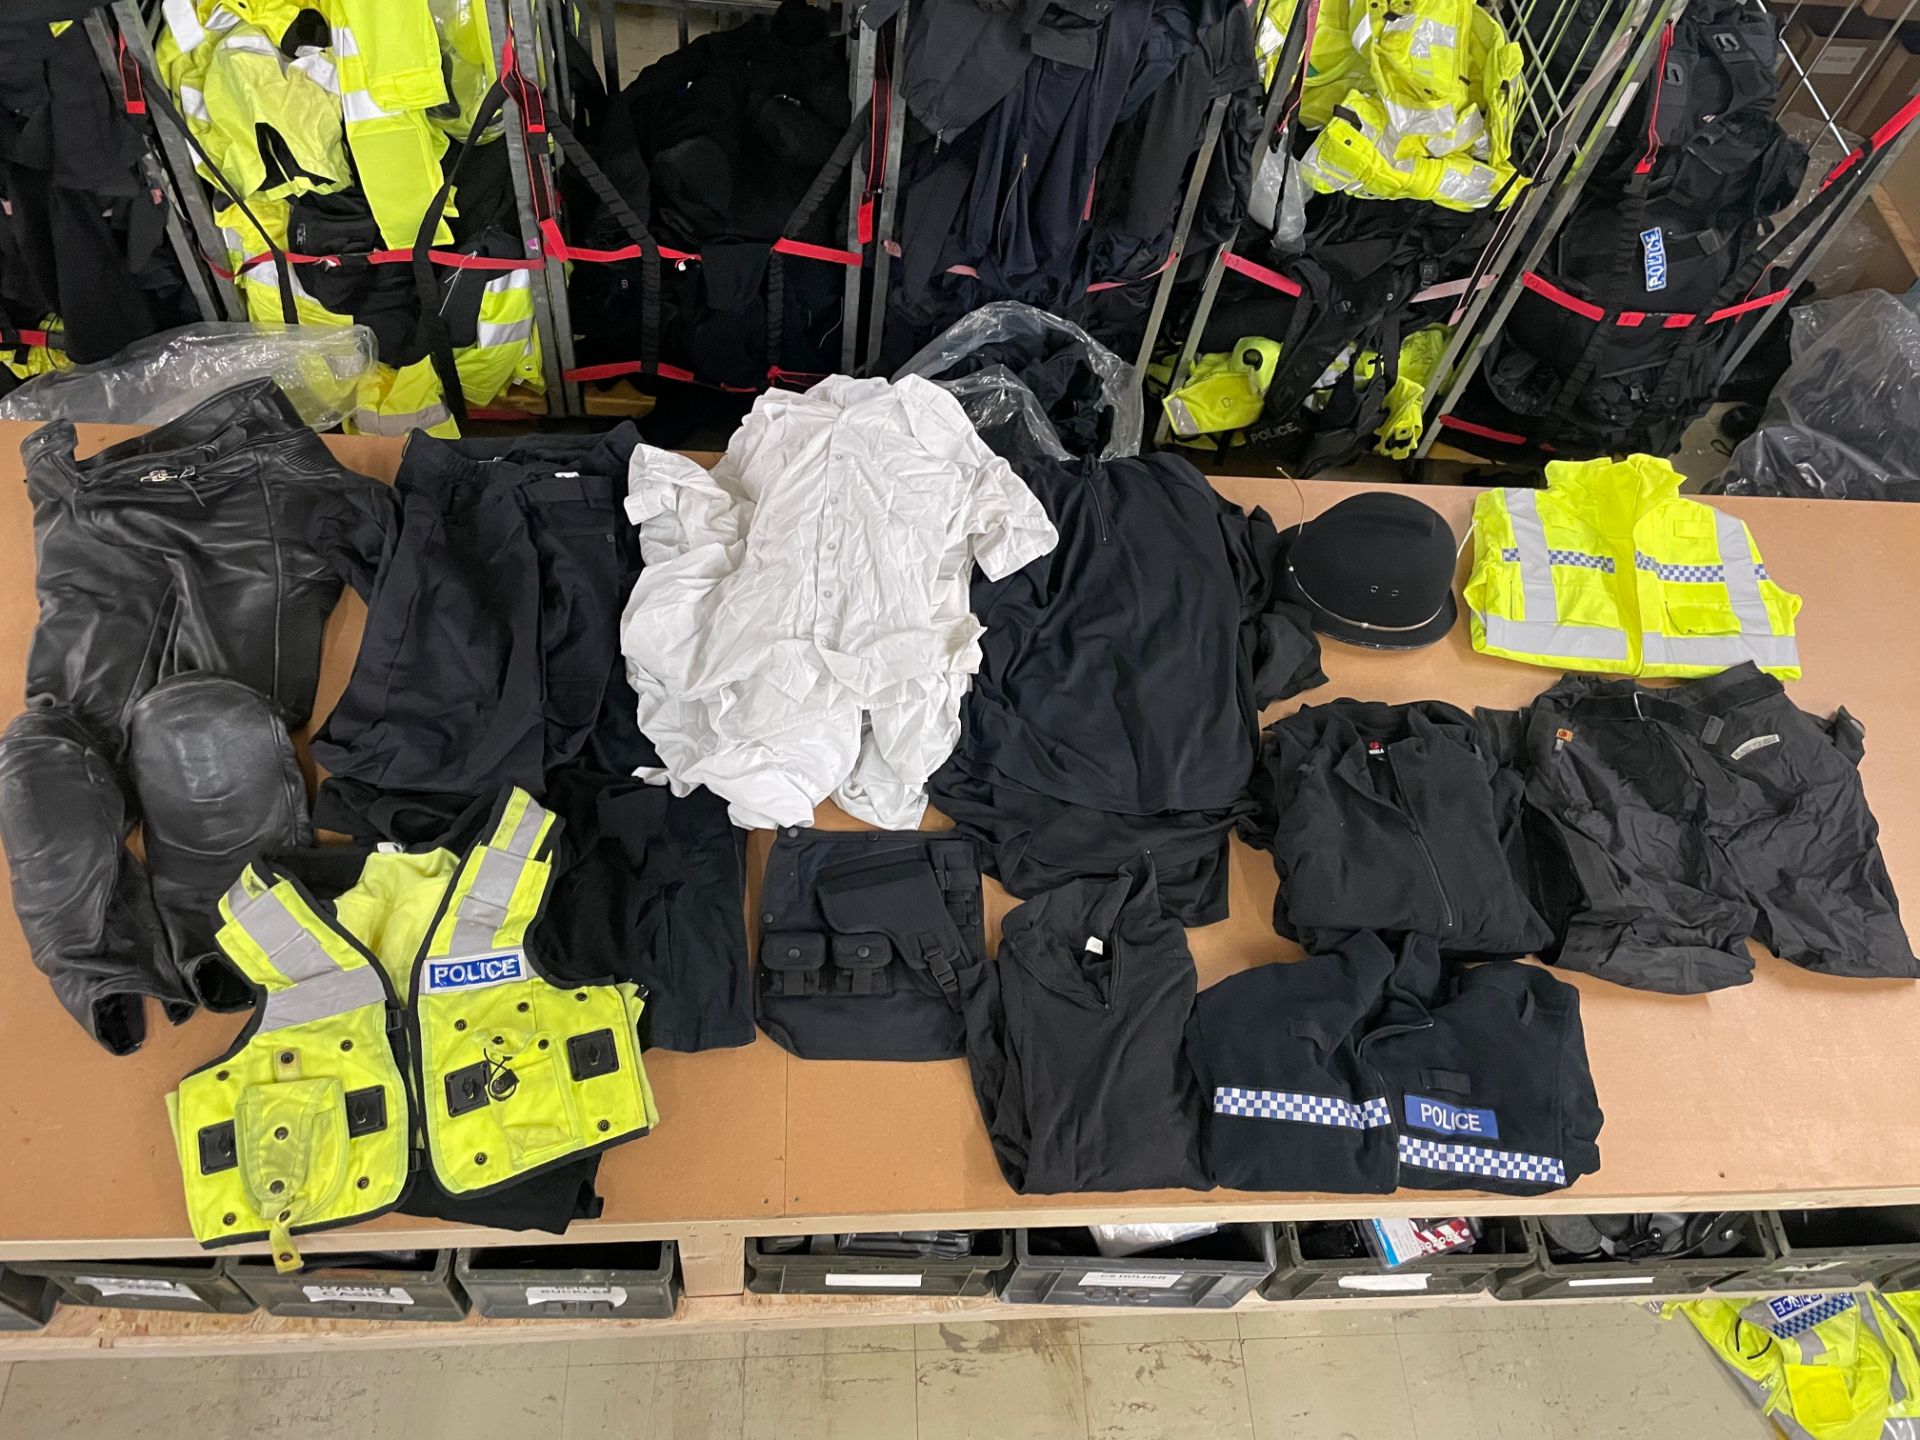 20 X BAGS EX POLICE CLOTHING & ACCESSORIES - RRP £5500.00 - Image 12 of 12